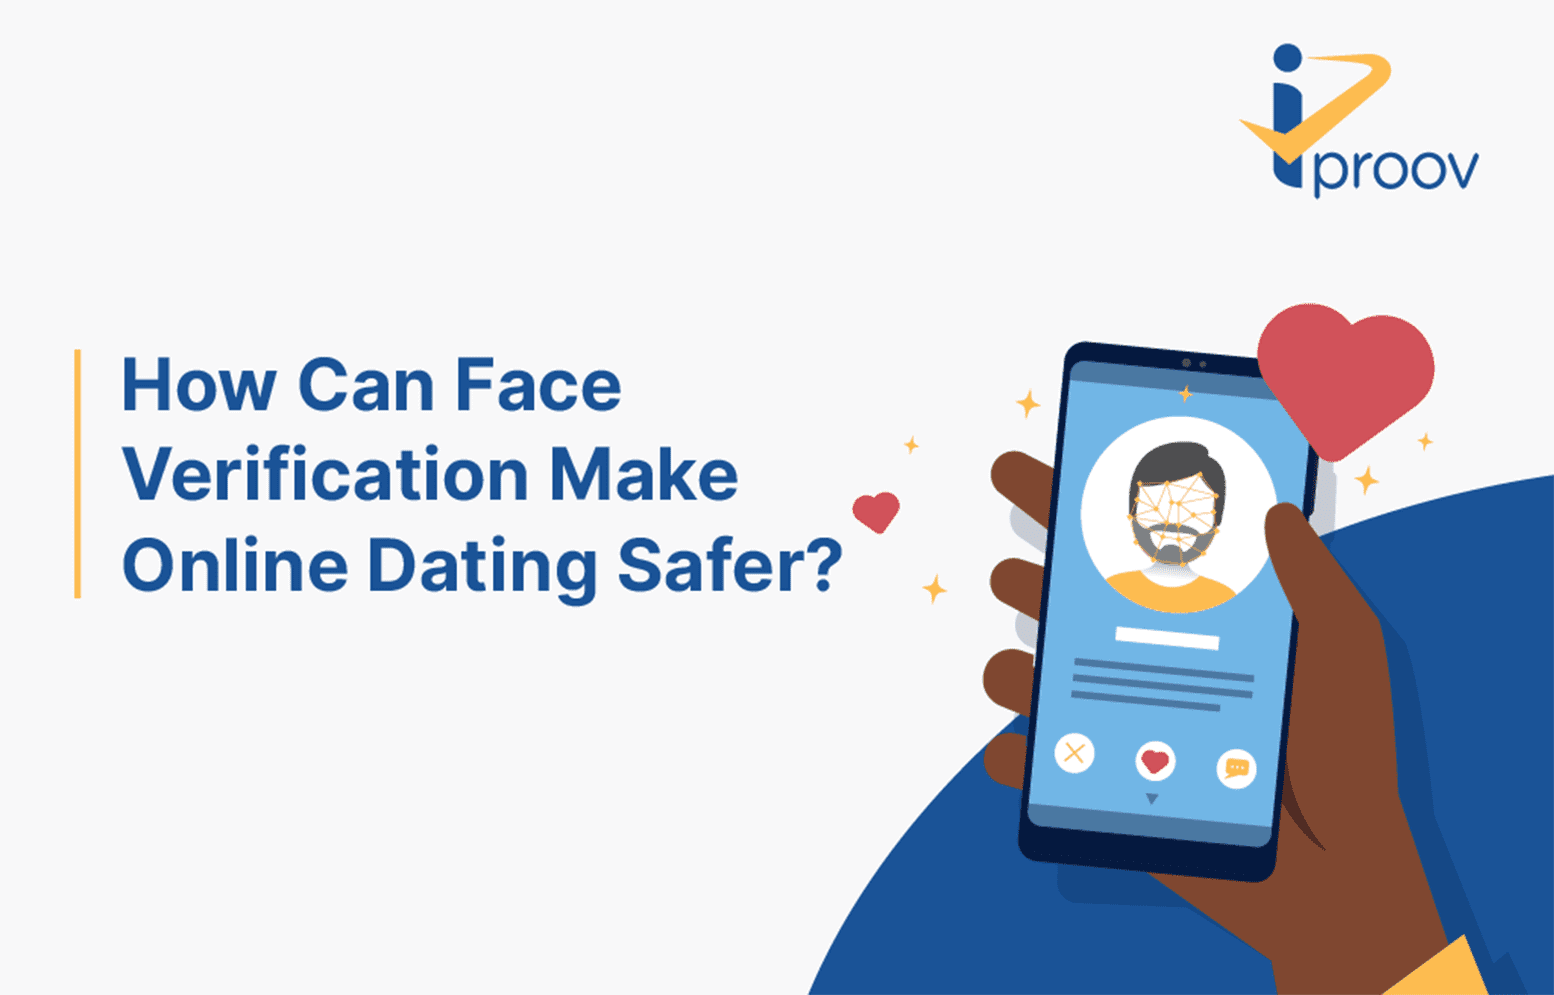 How face verification biometrics can make online dating safer with identity verification